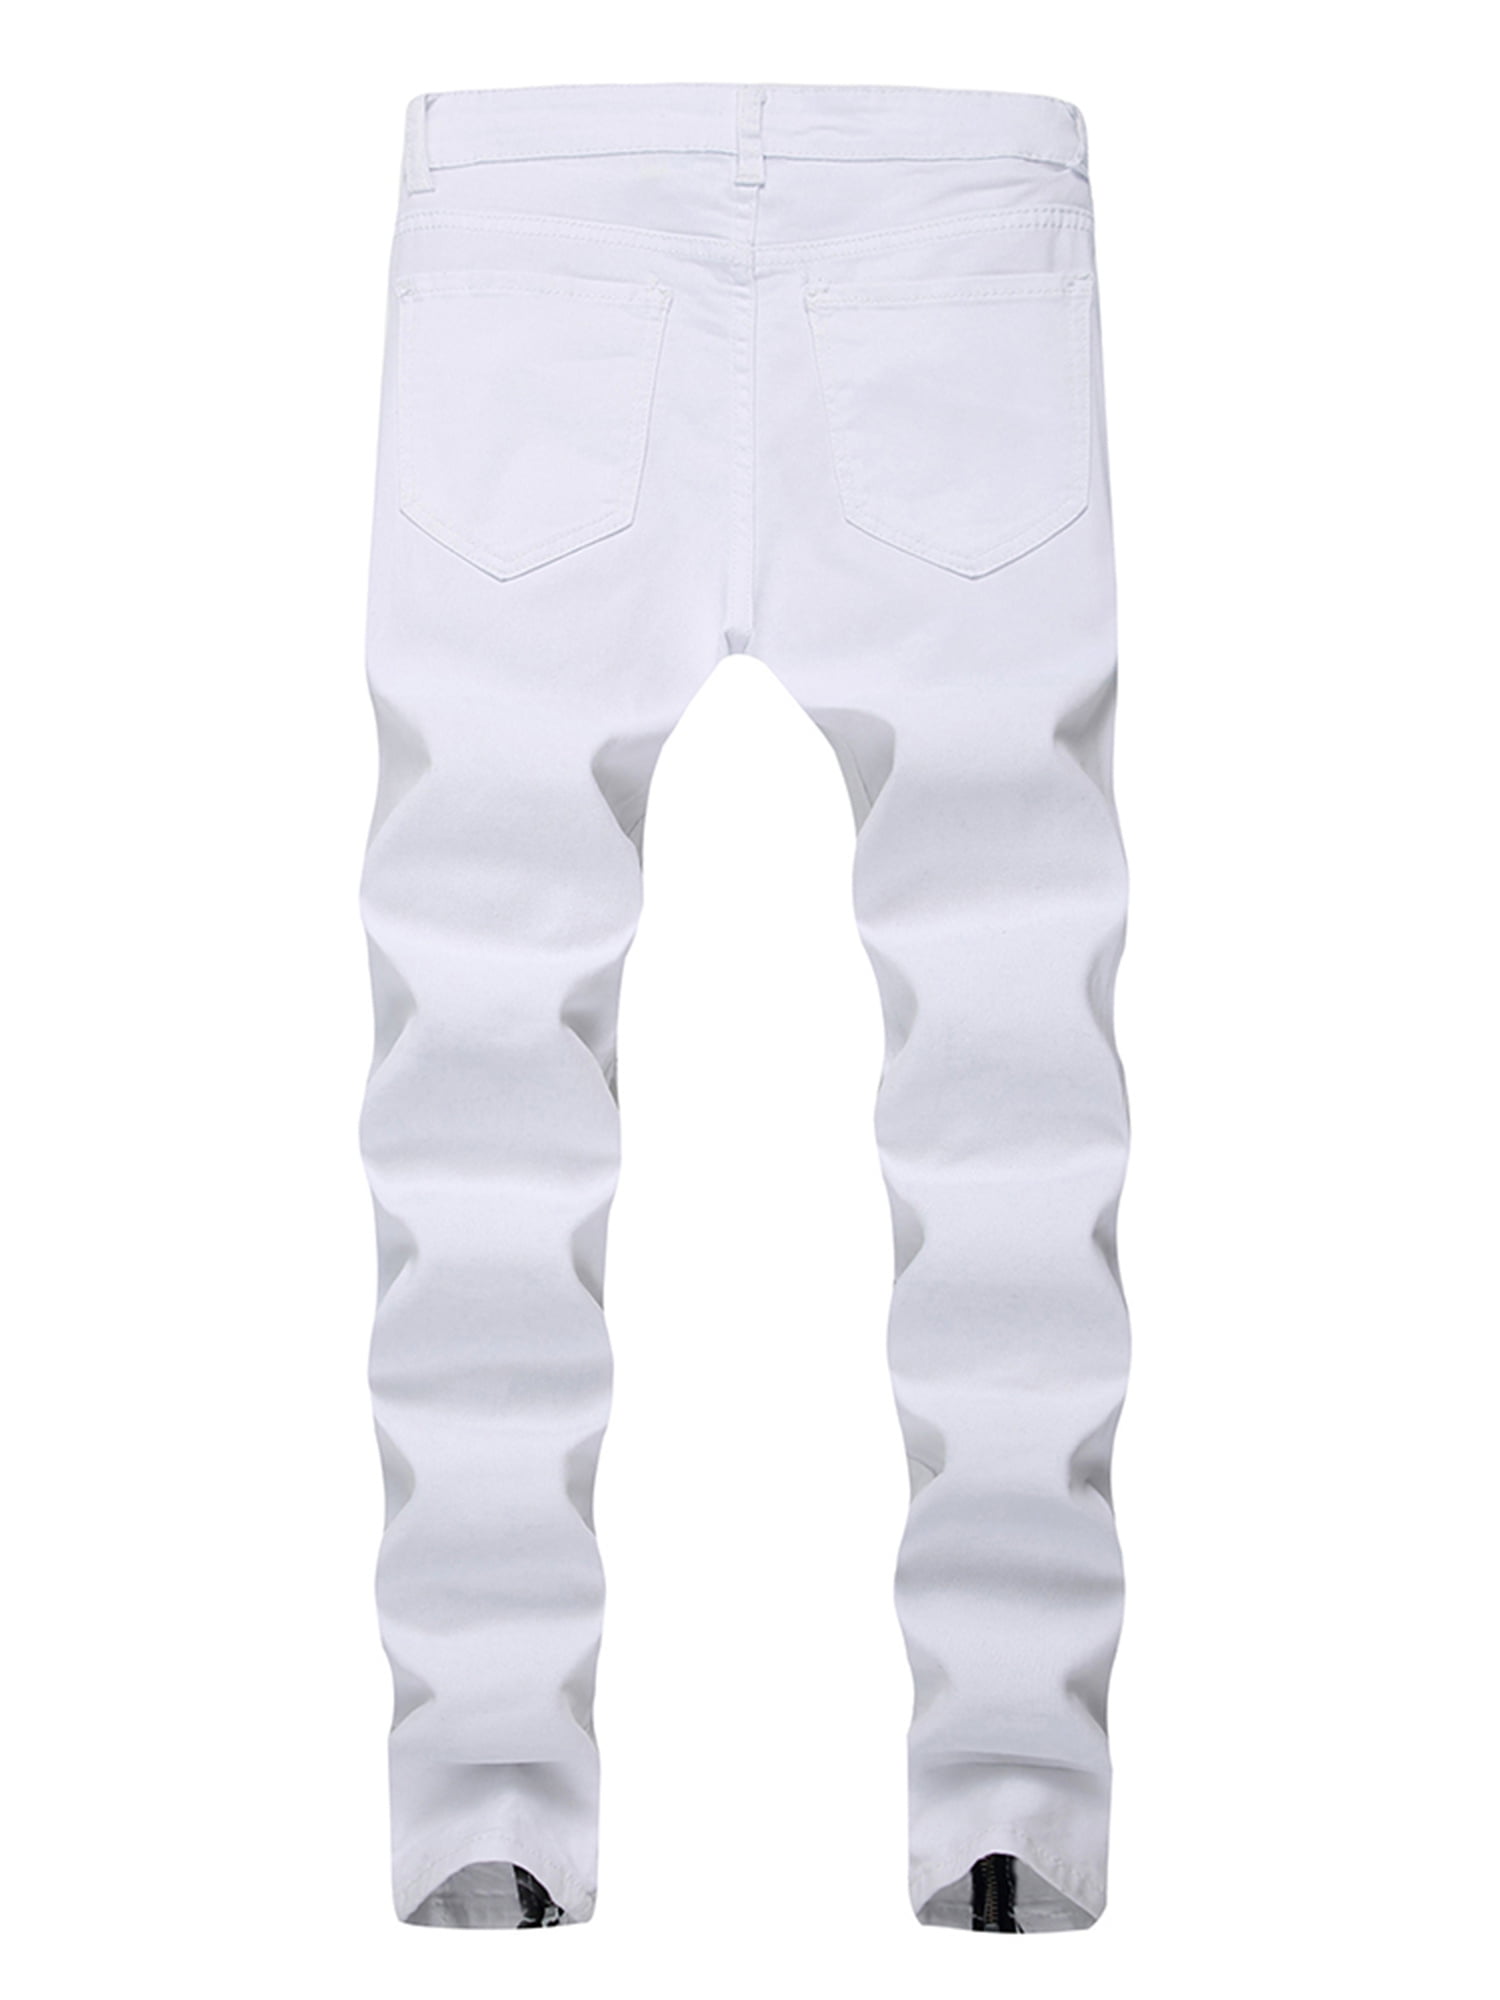 Pfysire Mens Skinny Jeans White Ripped Long Pants Distressed Trousers White - Walmart.com